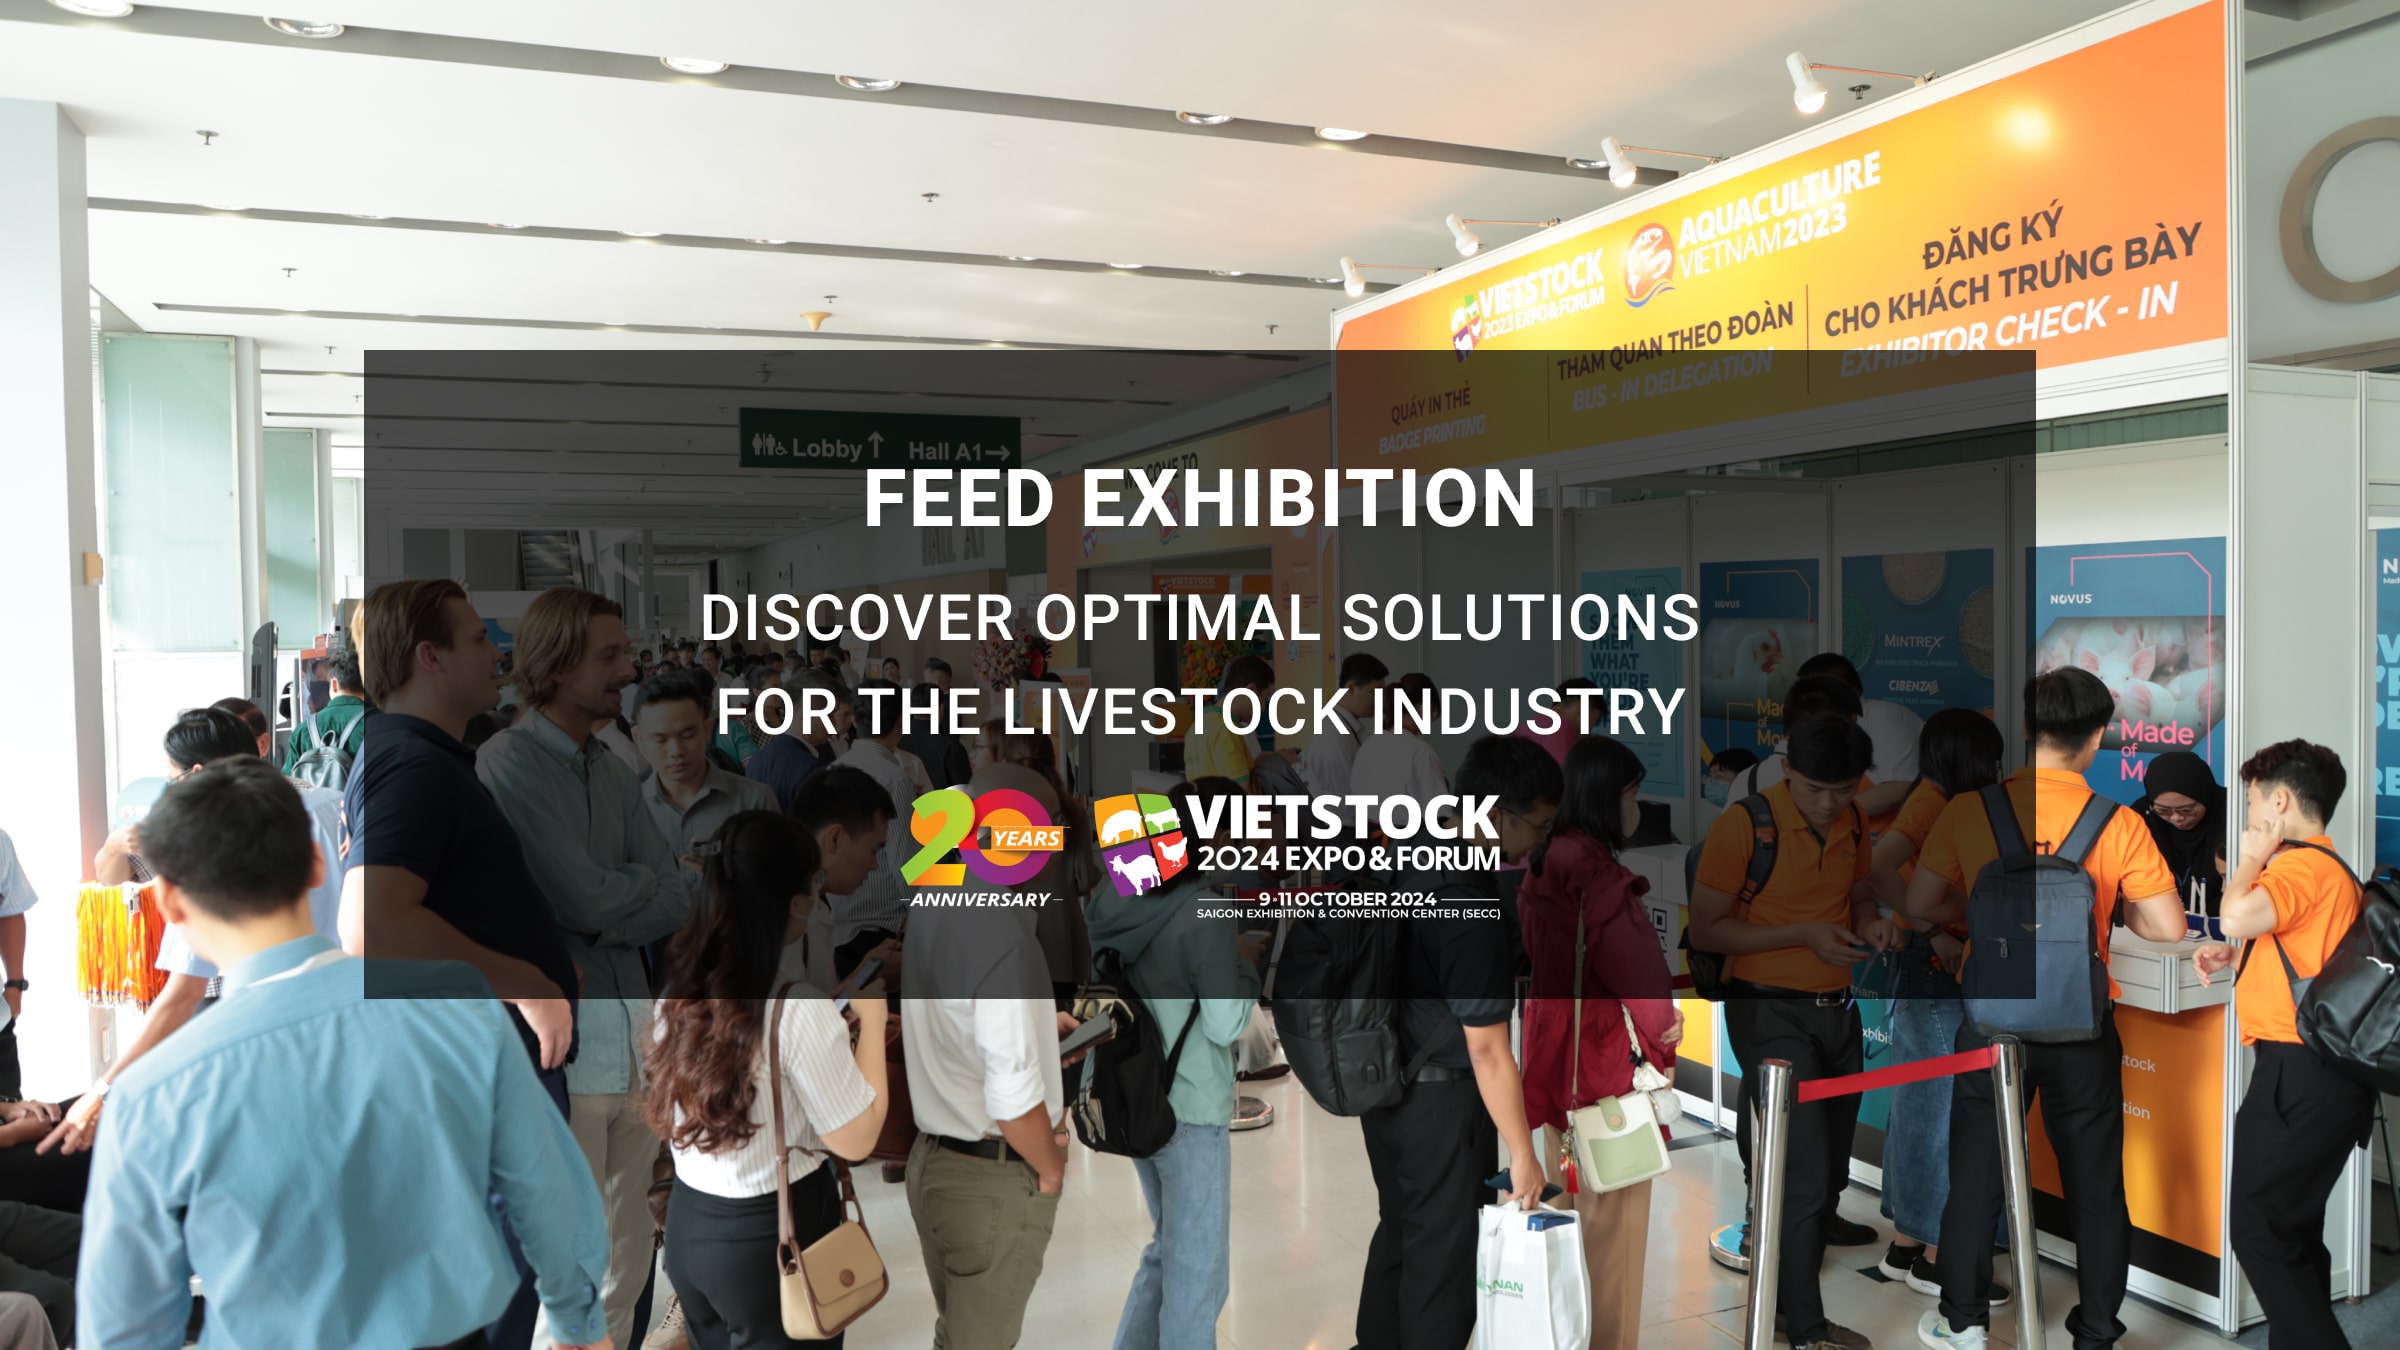 FEED EXHIBITION: DISCOVER OPTIMAL SOLUTIONS FOR THE LIVESTOCK INDUSTRY